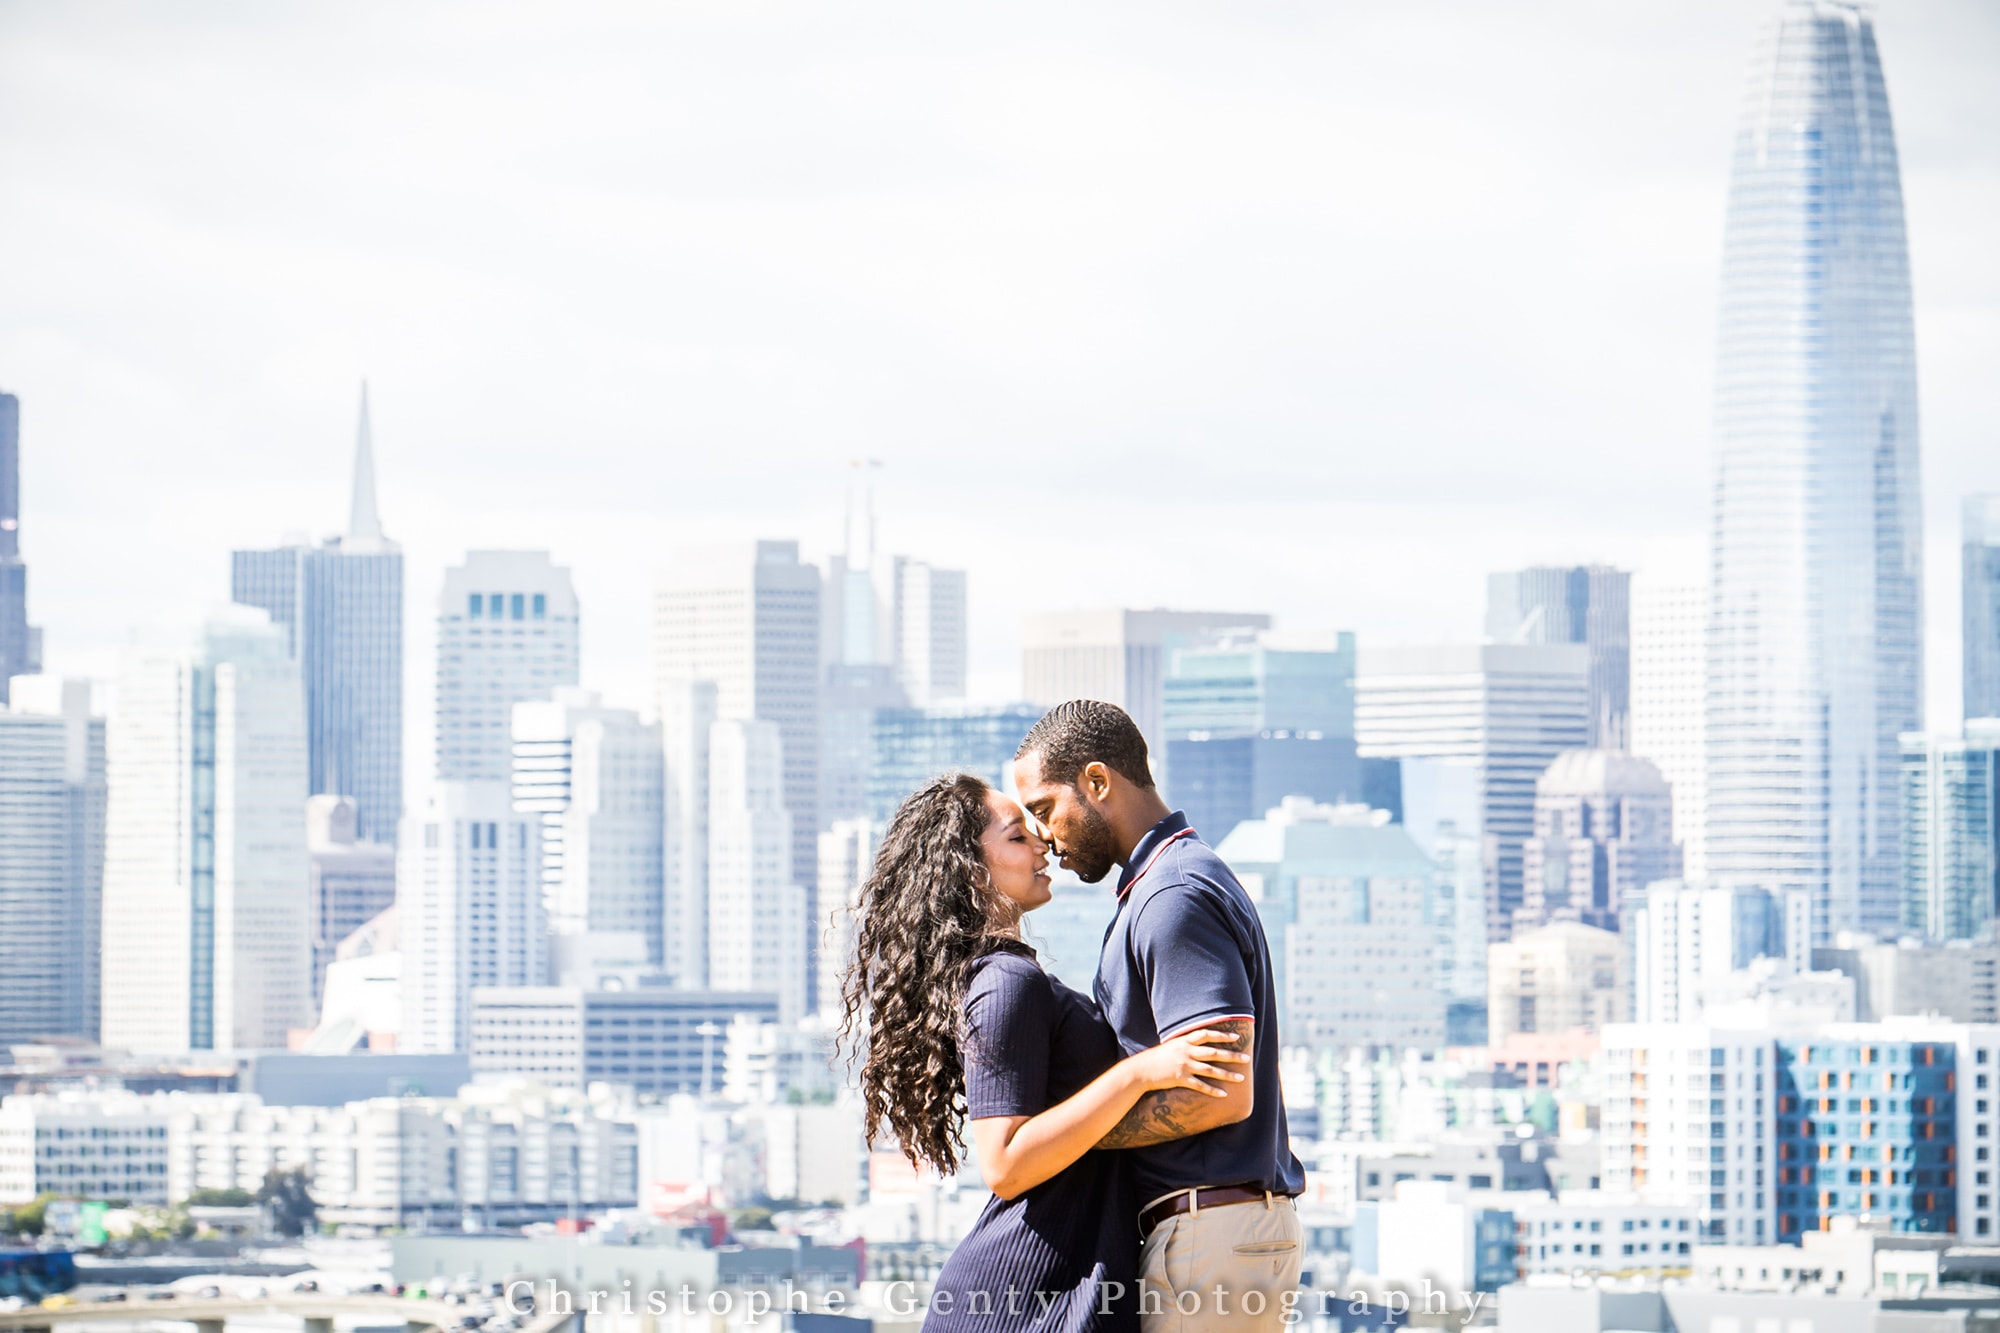 Engagement photography in San Francisco Bay Area, CA